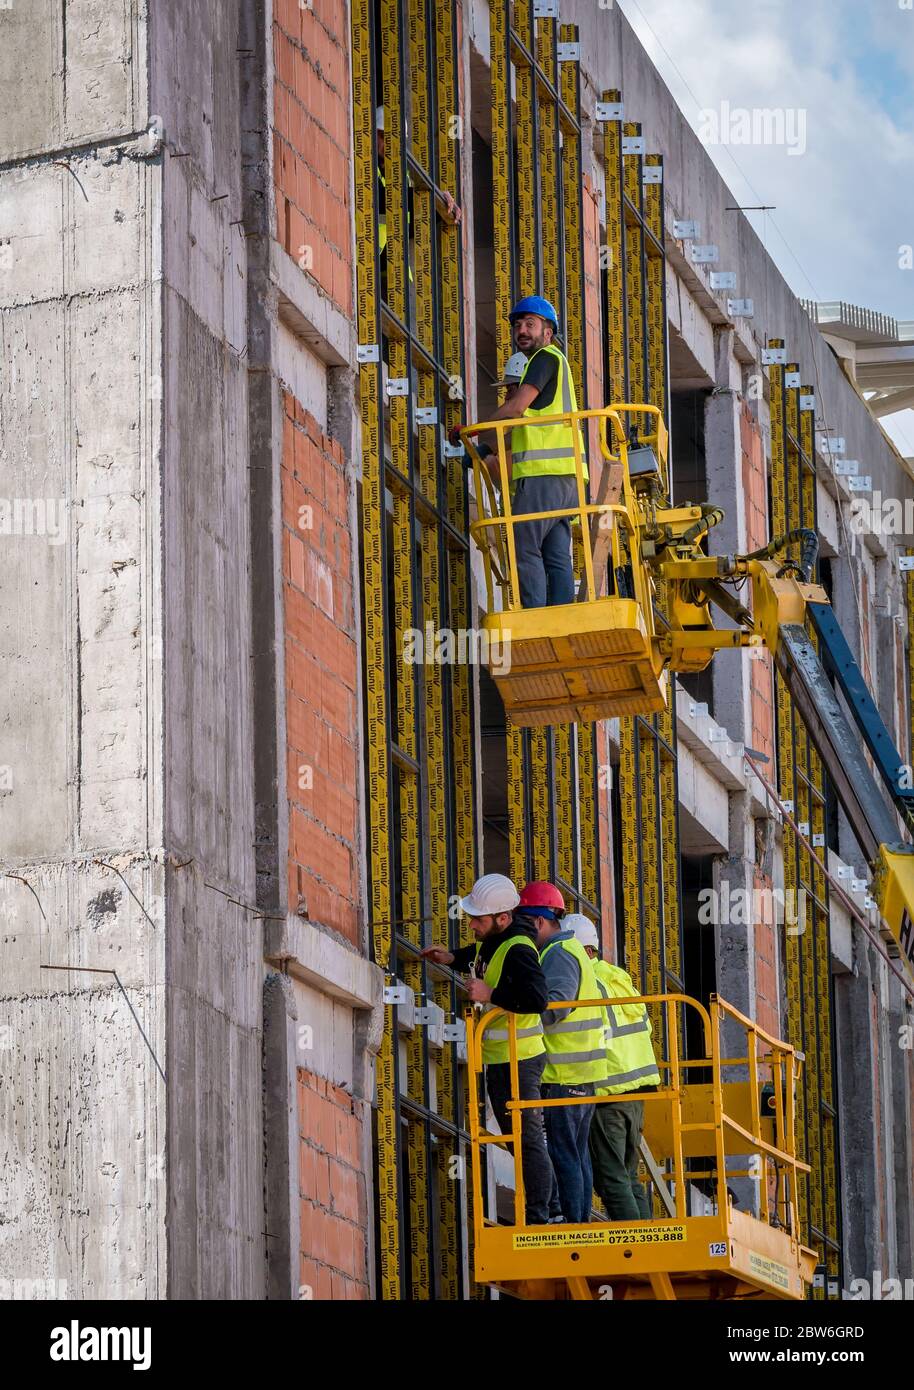 Bucharest/Romania - 05.16.2020: Construction workers on a scaffold. Men  working at a buildingfrom a hydraulic Lift table Platform Stock Photo -  Alamy